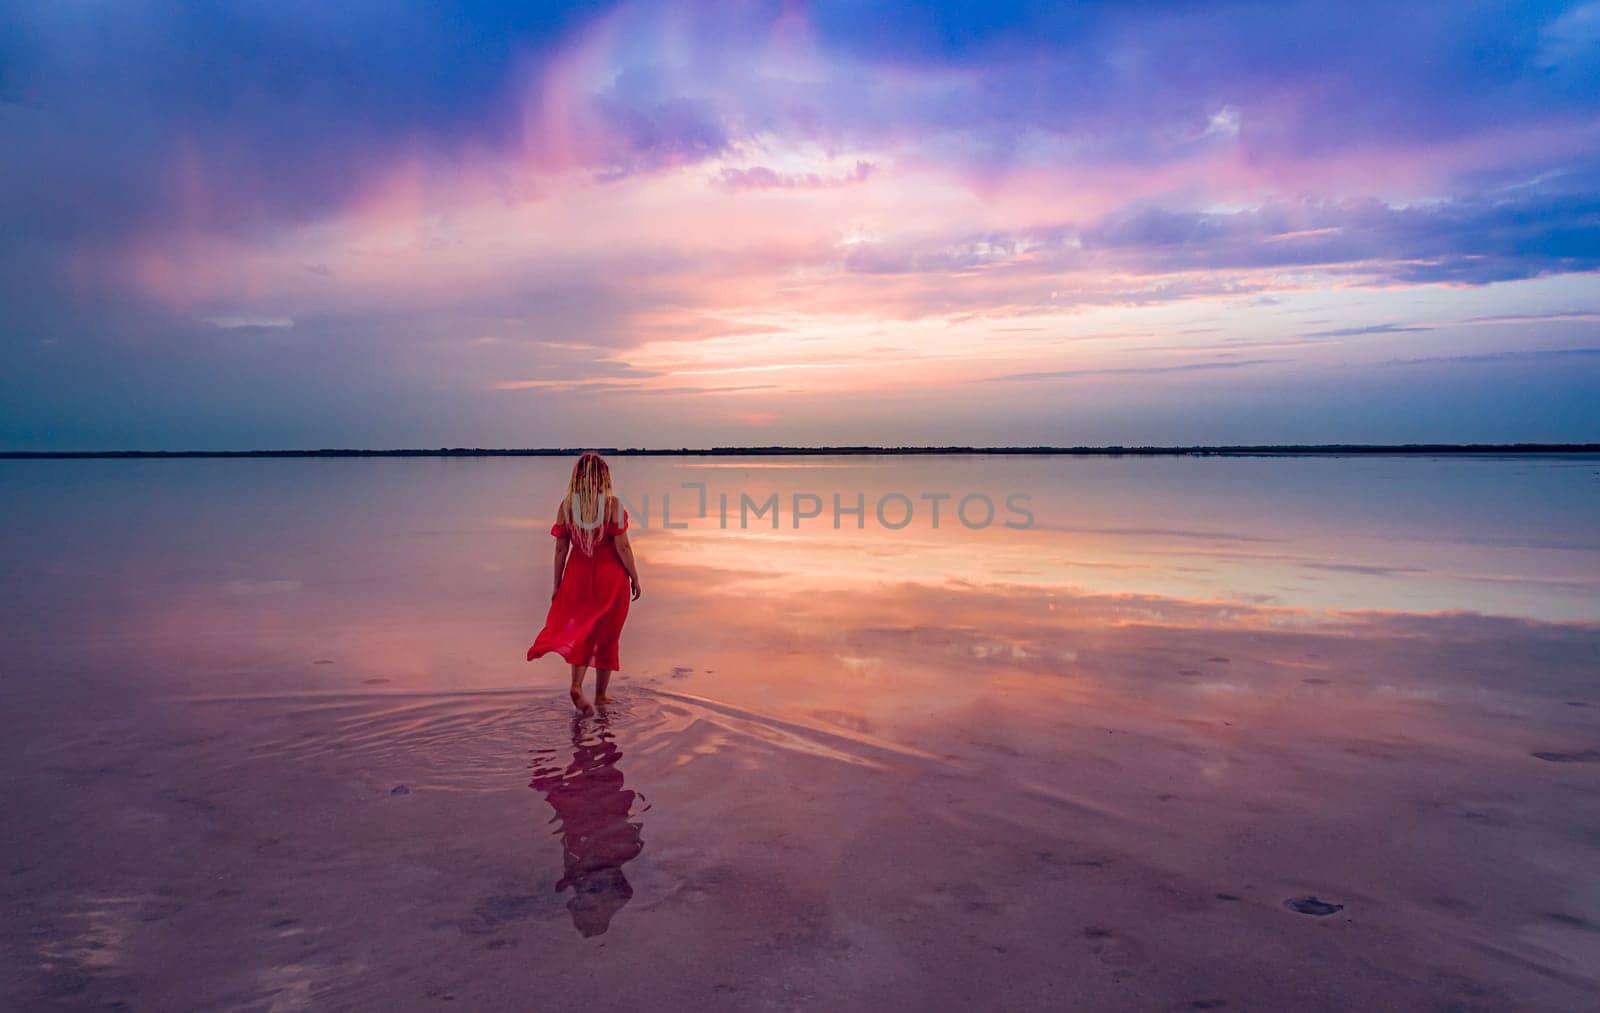 Aerial of a young woman in red dress walking in the water of a unique pink salt lake. Sunset at lake Bursol with beautiful reflections on calm water surface. Stunning scenery.